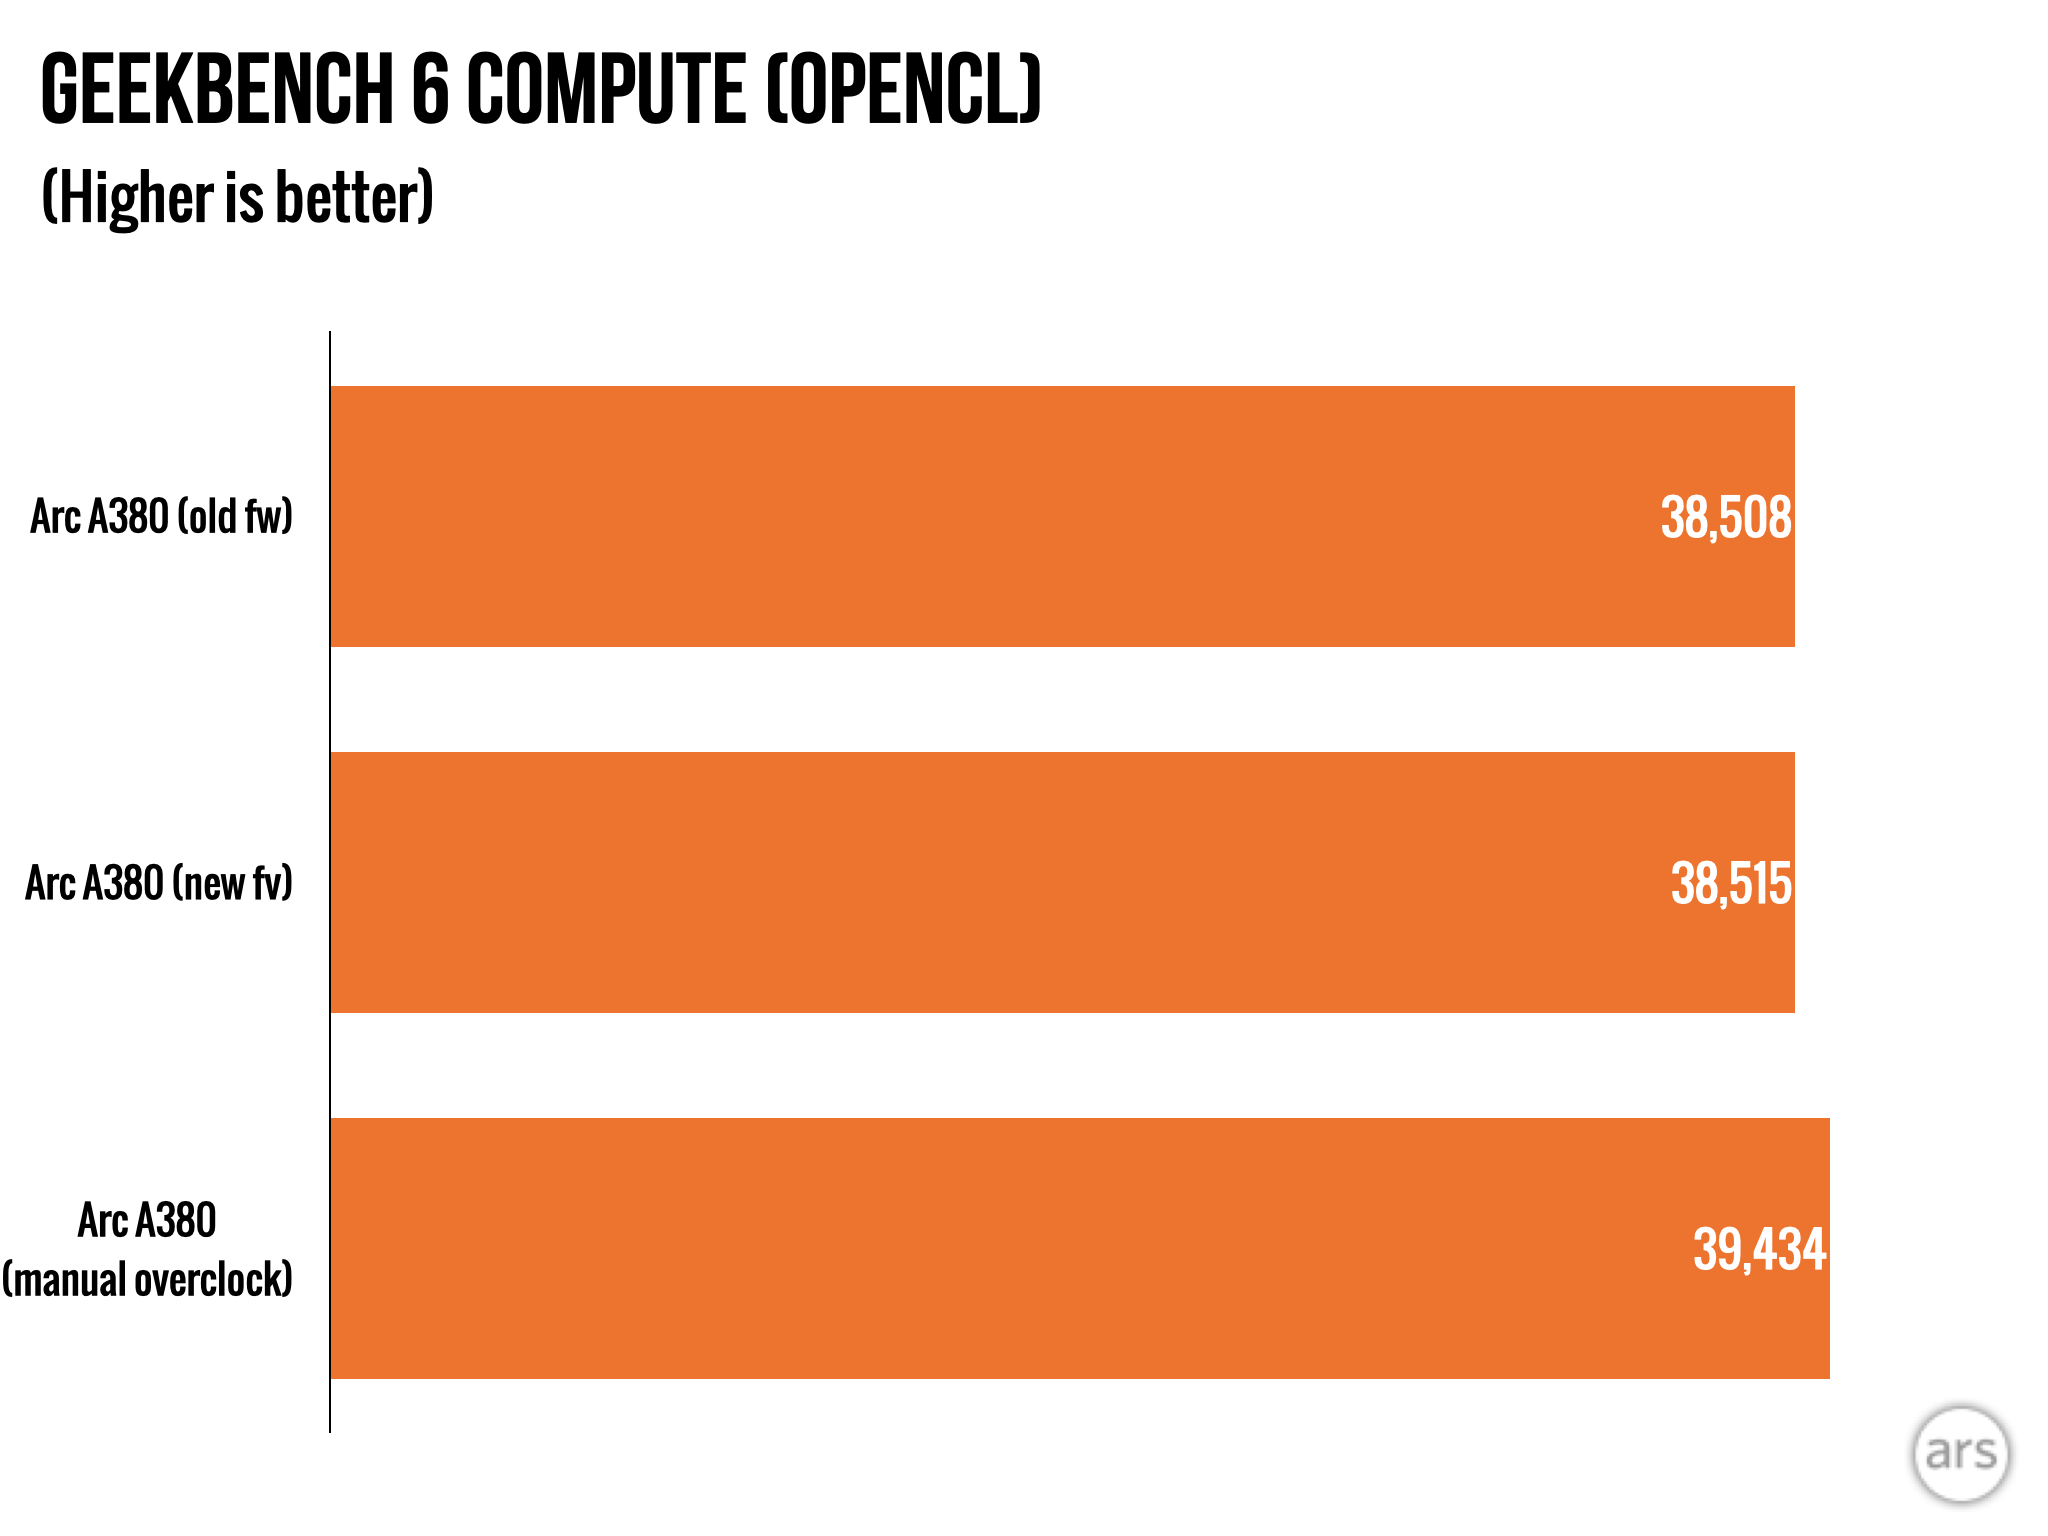 AMD confirms GPU driver bug overclocks CPUs without permission